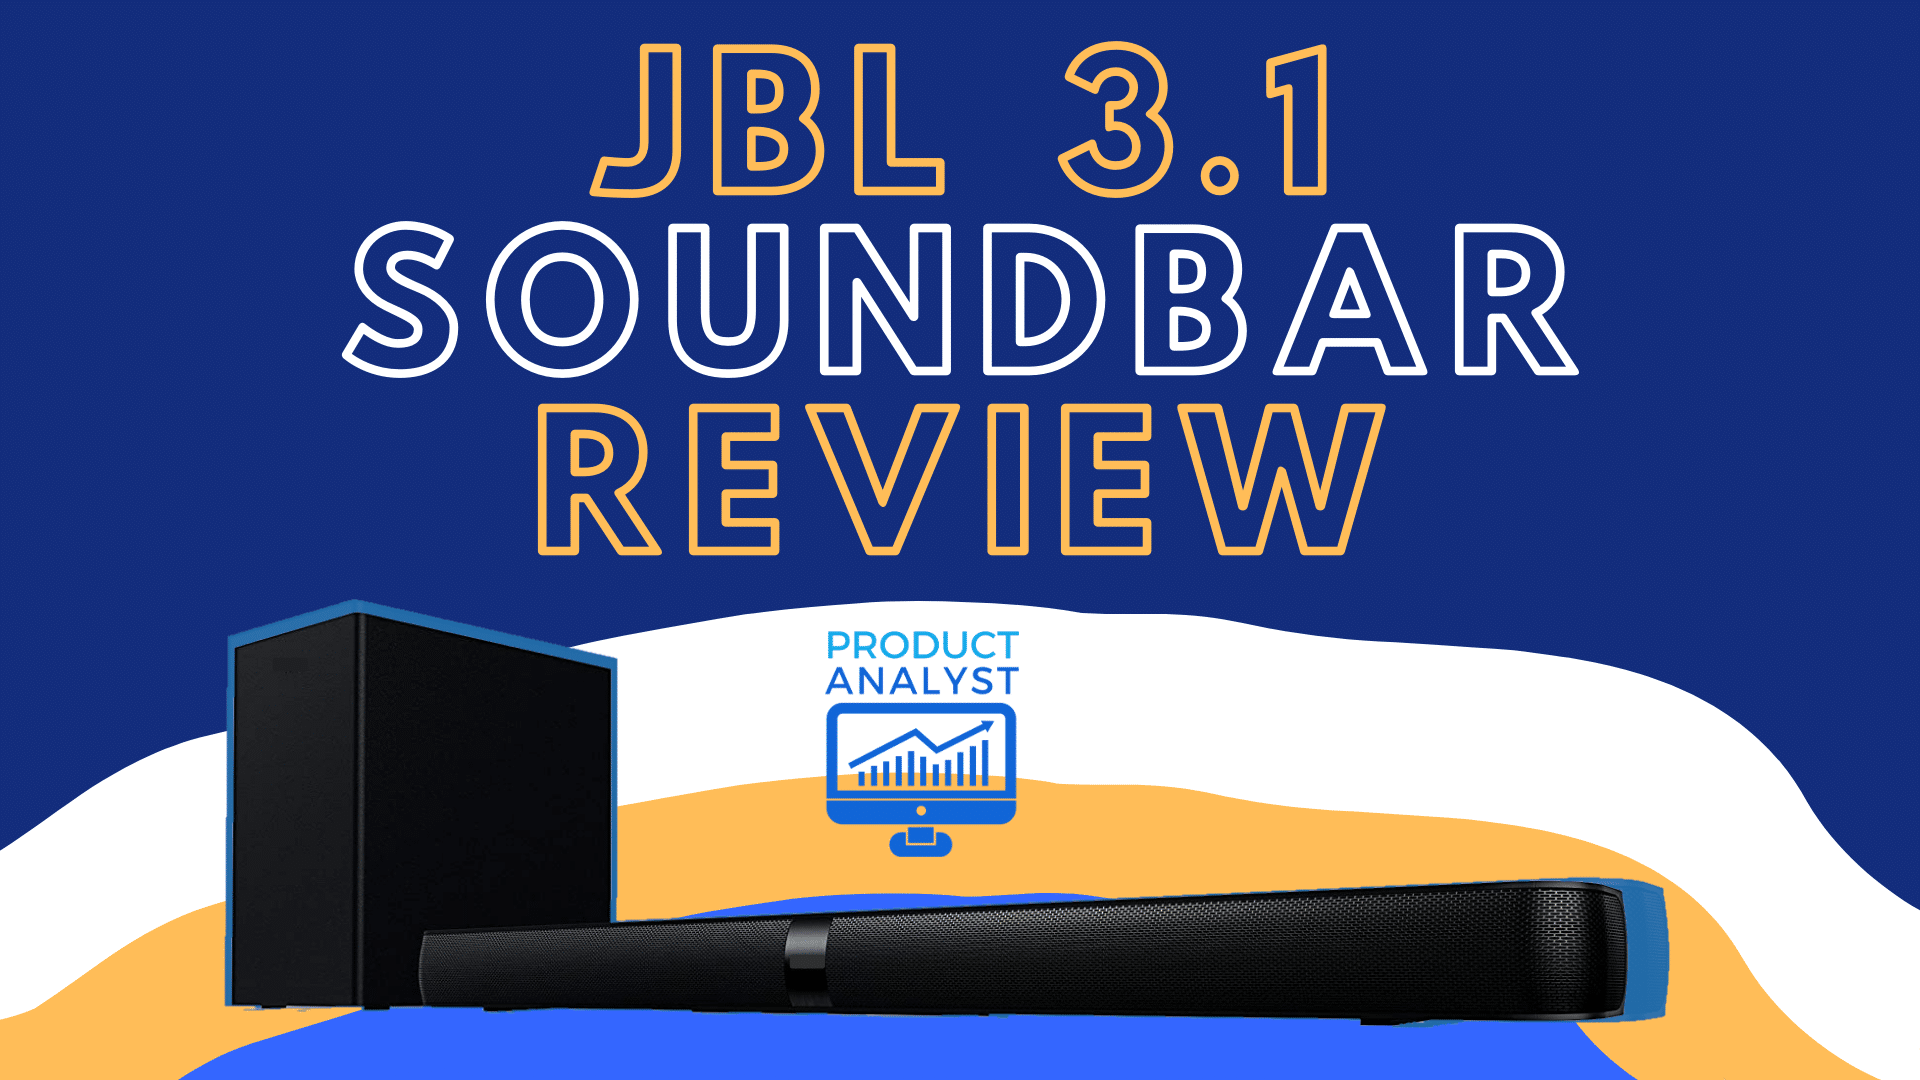 JBL 3.1 Soundbar Review: Is This Device Worth